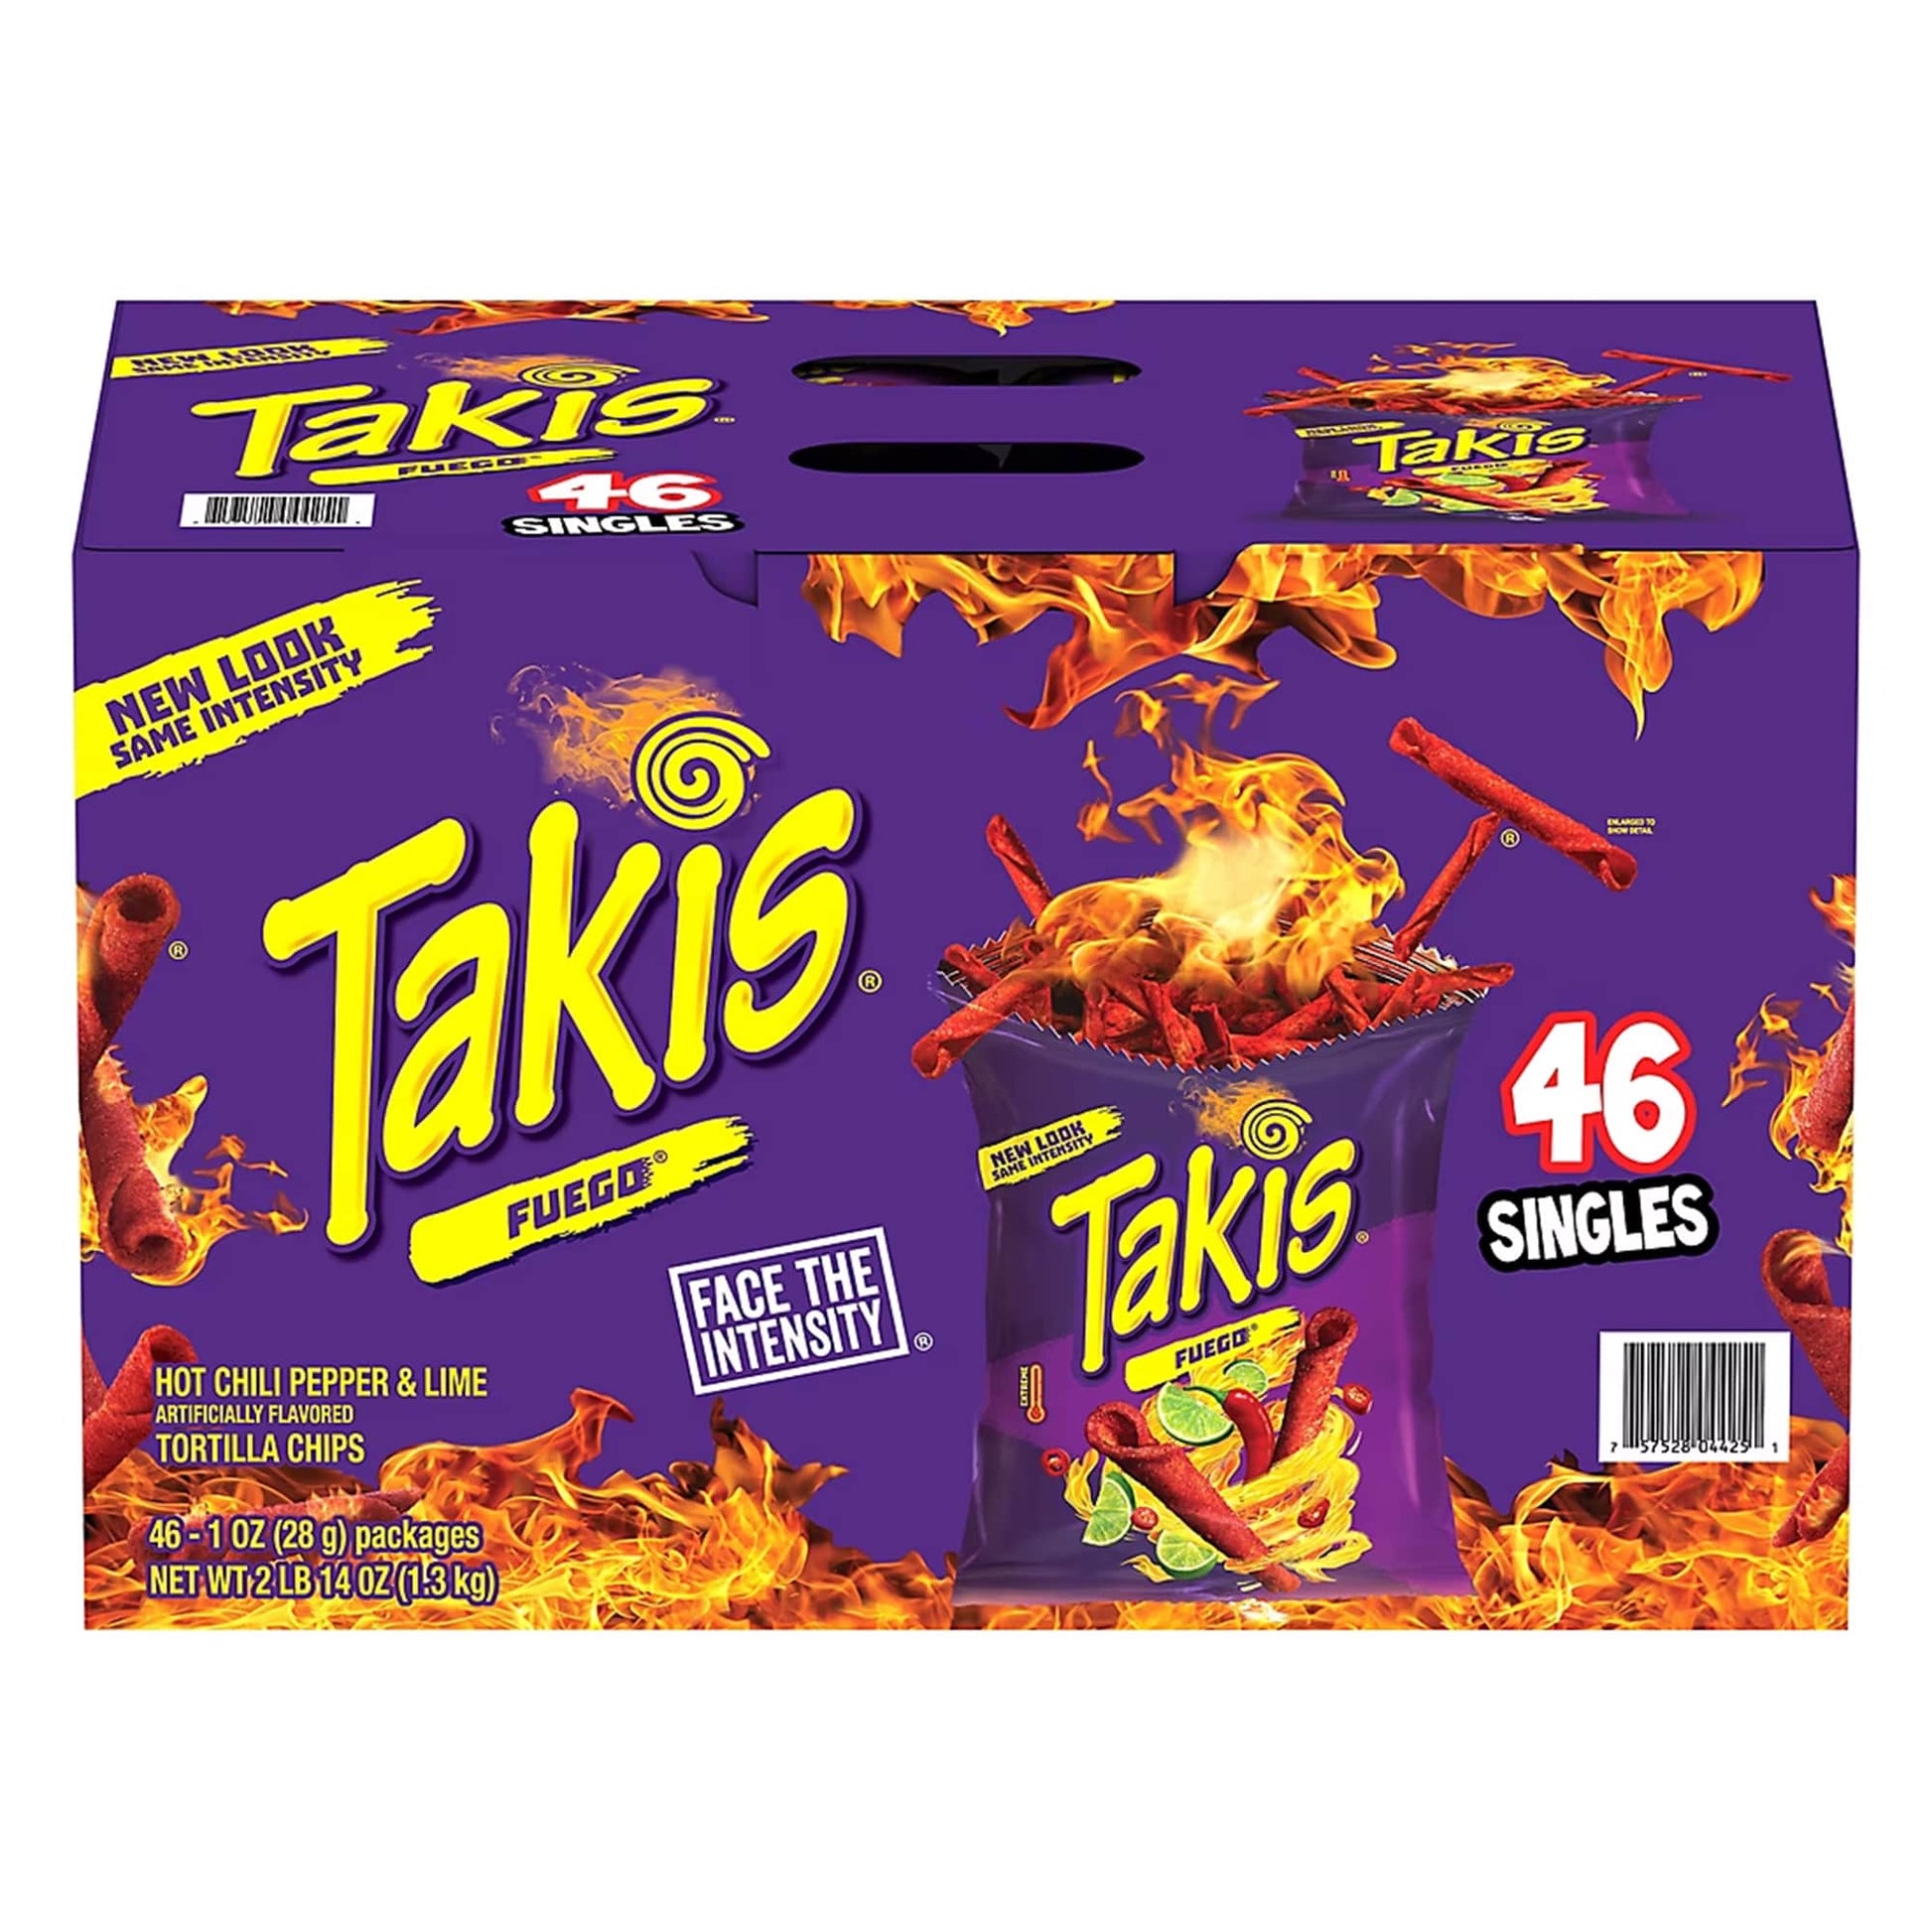 Takis Fuego Spicy Rolled Tortilla Chips Multipack, 46 ct.-0